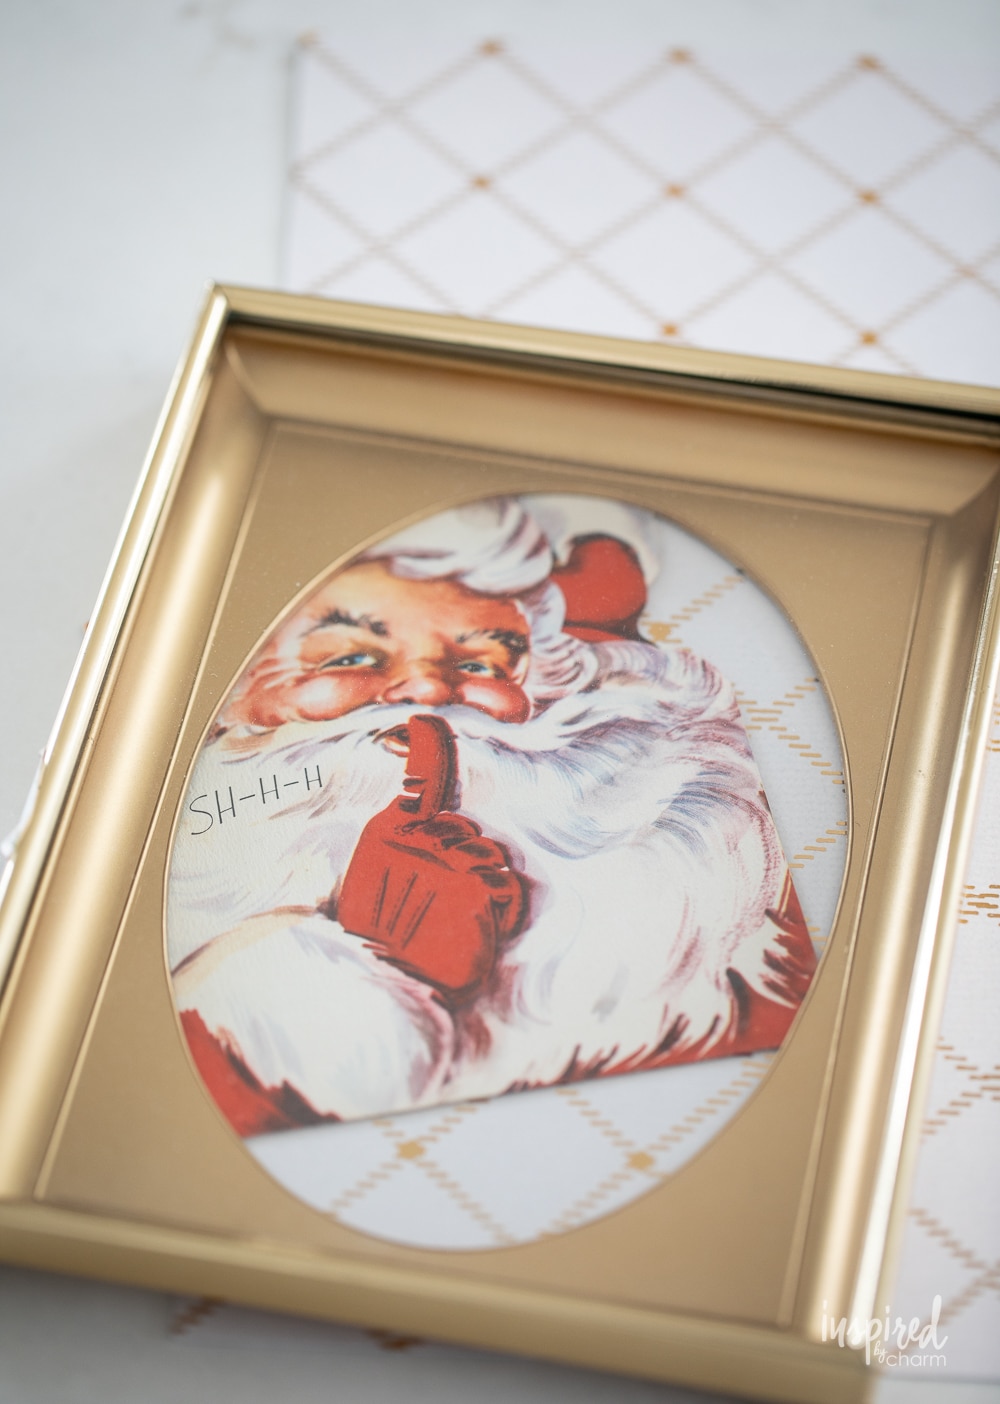 putting a christmas card of santa into a gold frame.